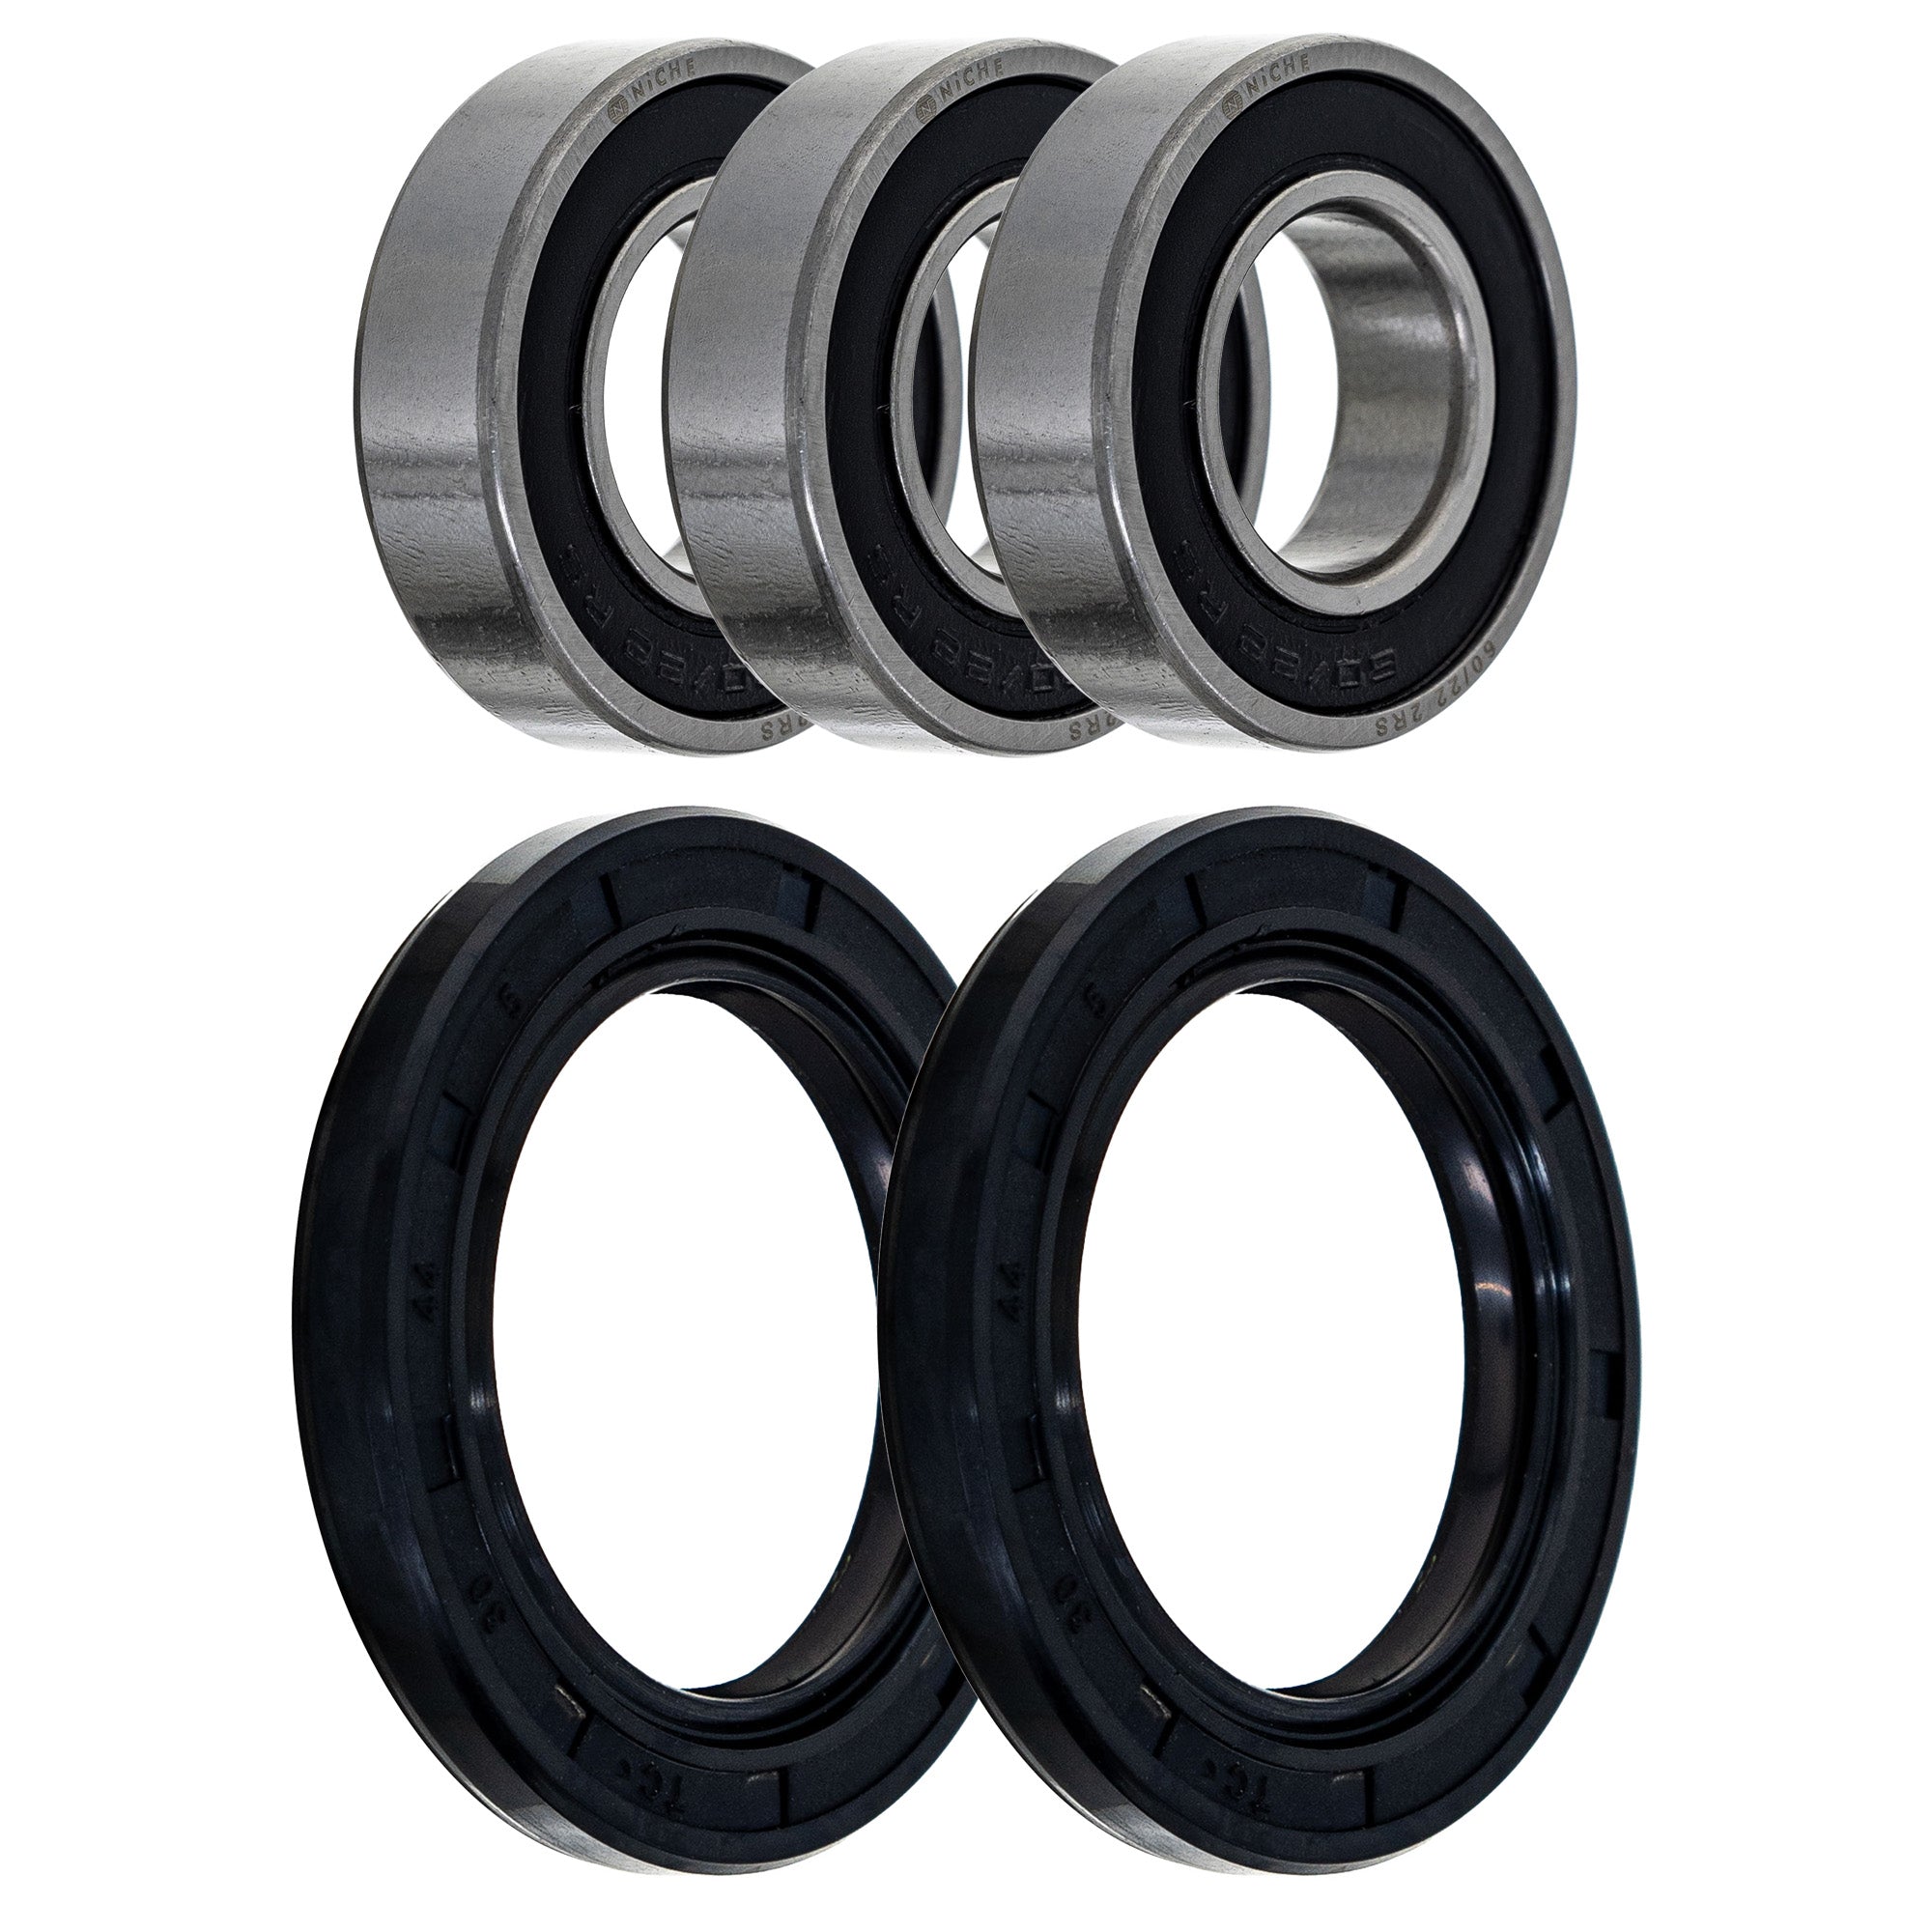 Wheel Bearing Seal Kit for zOTHER RM250 RM125 NICHE MK1009132